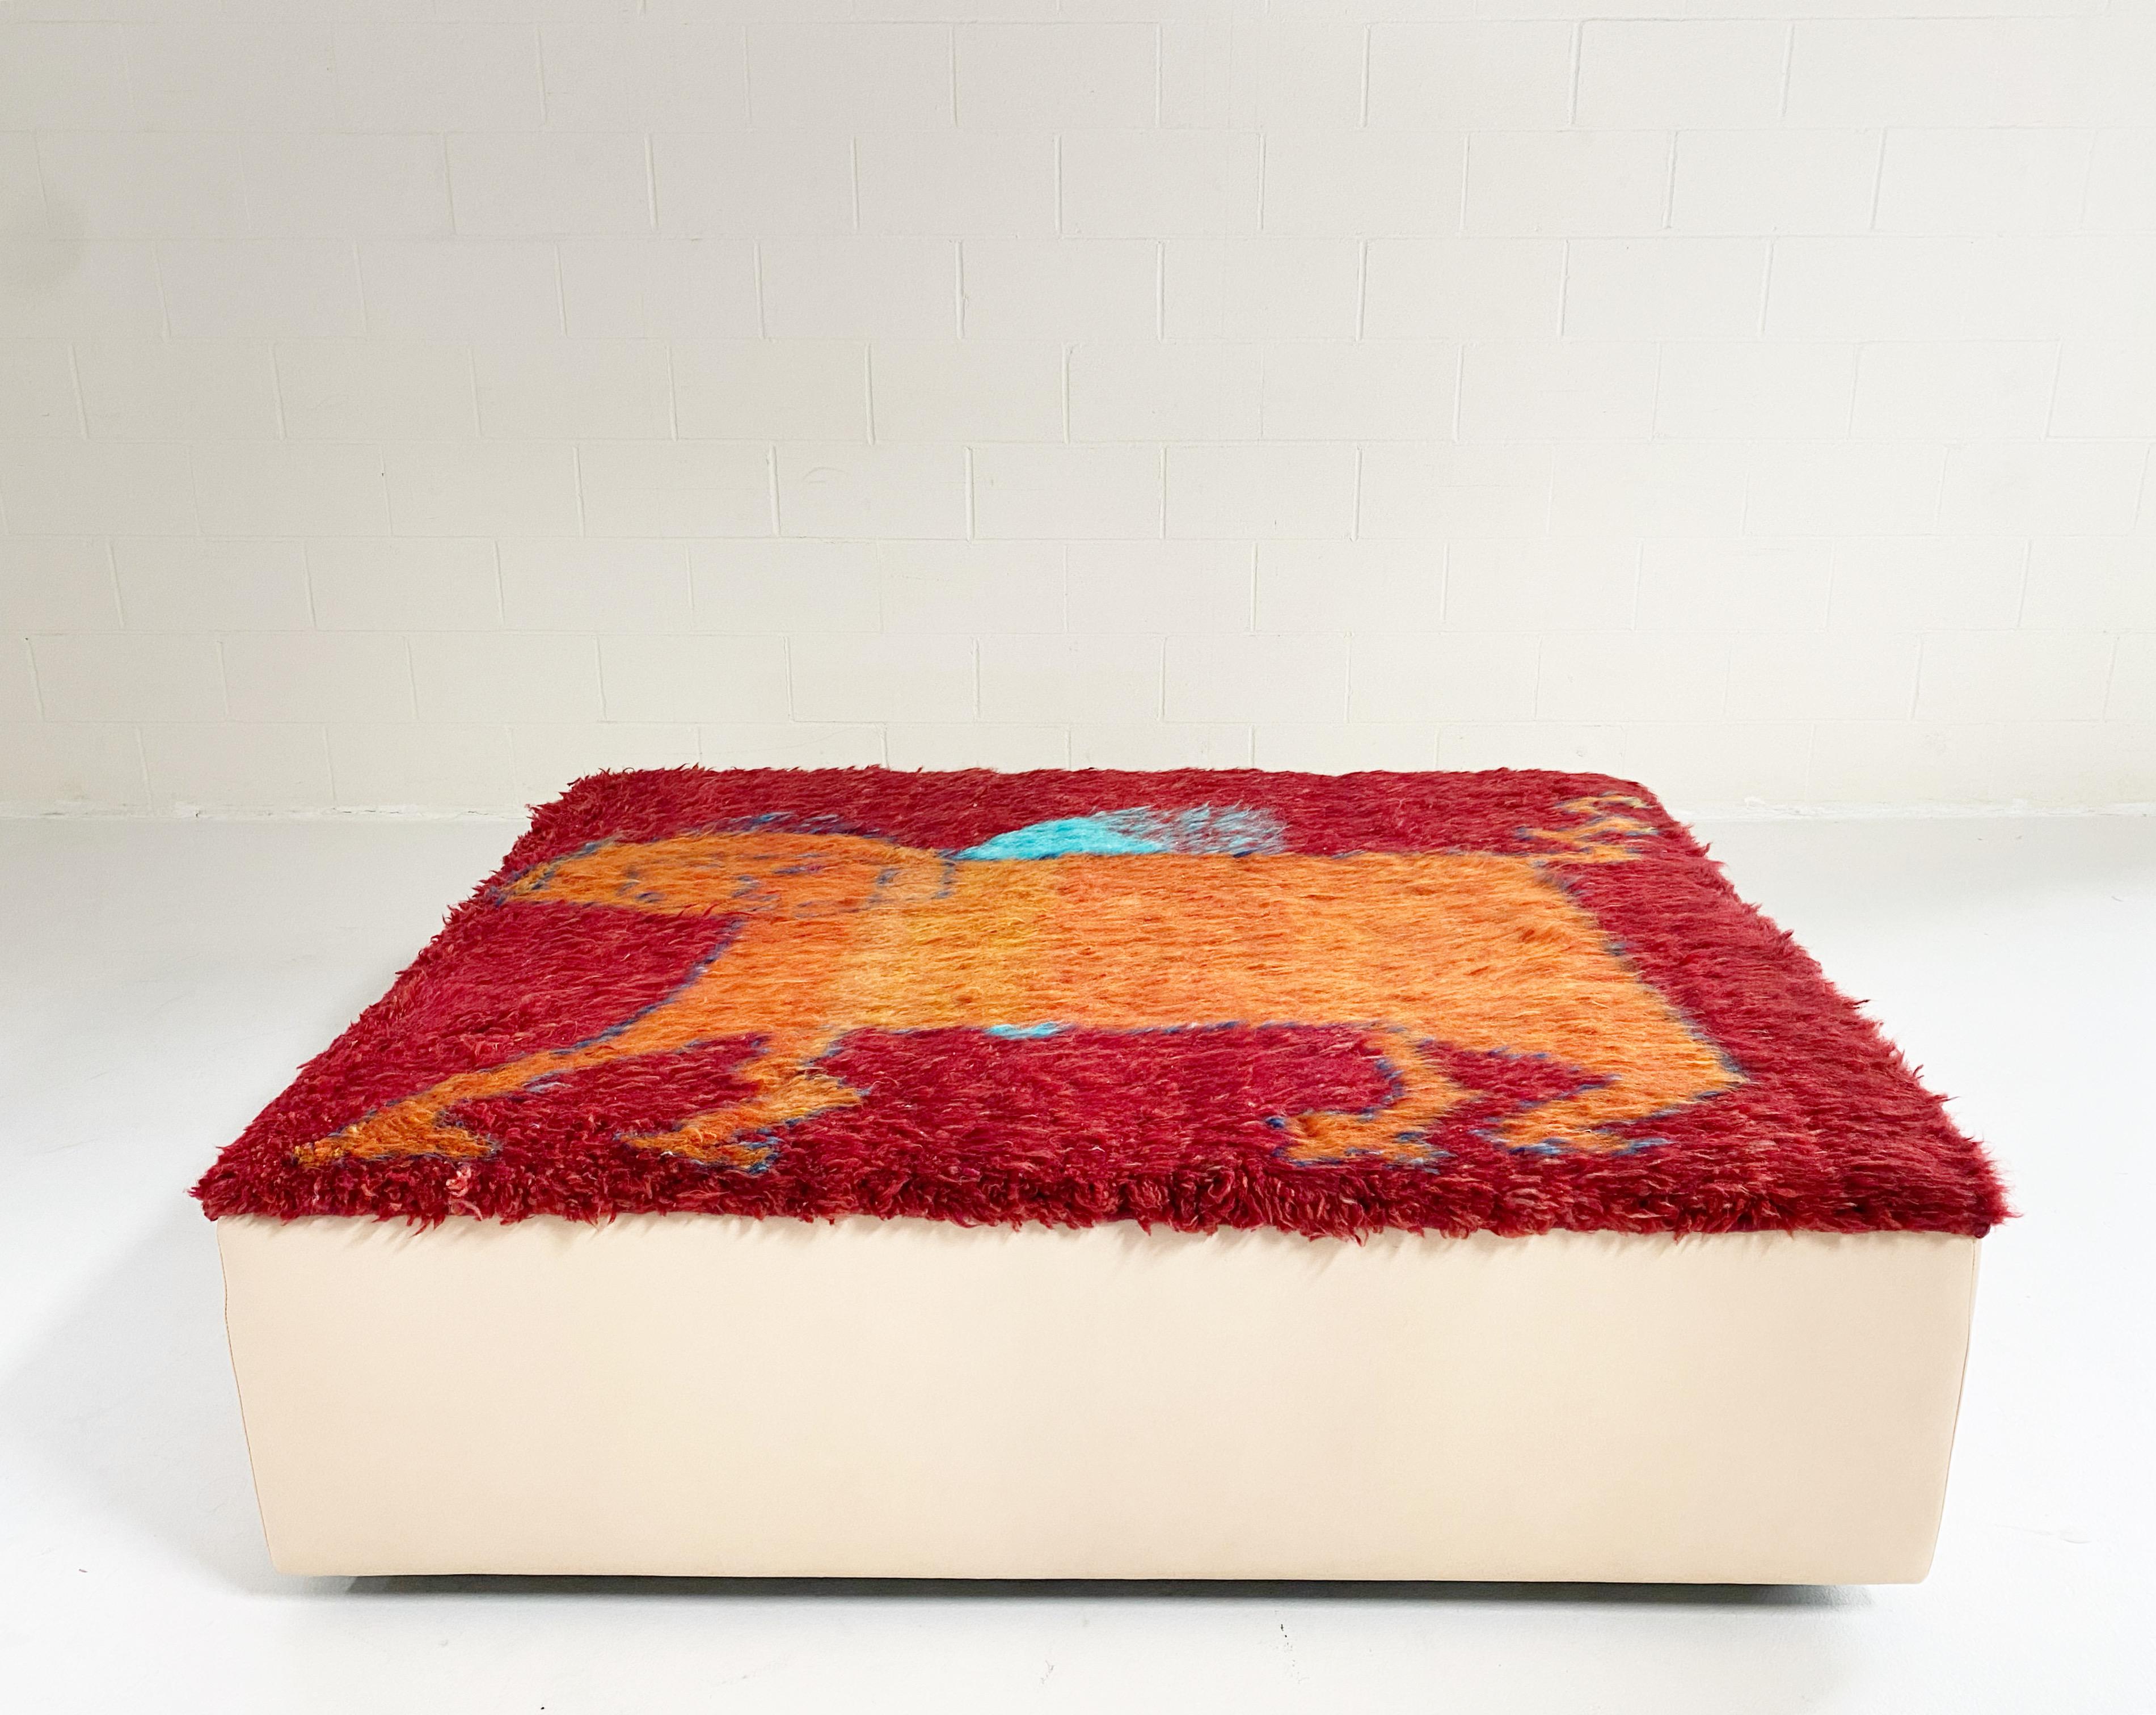 A one-of-a-kind ottoman designed by Forsyth and beautifully handmade using a vintage Iranian gabbeh rug (100% hand-spun sheep wool). The rug is finished with luxurious vegetable tanned leather sides. The perfect coffee table, ottoman, or extra